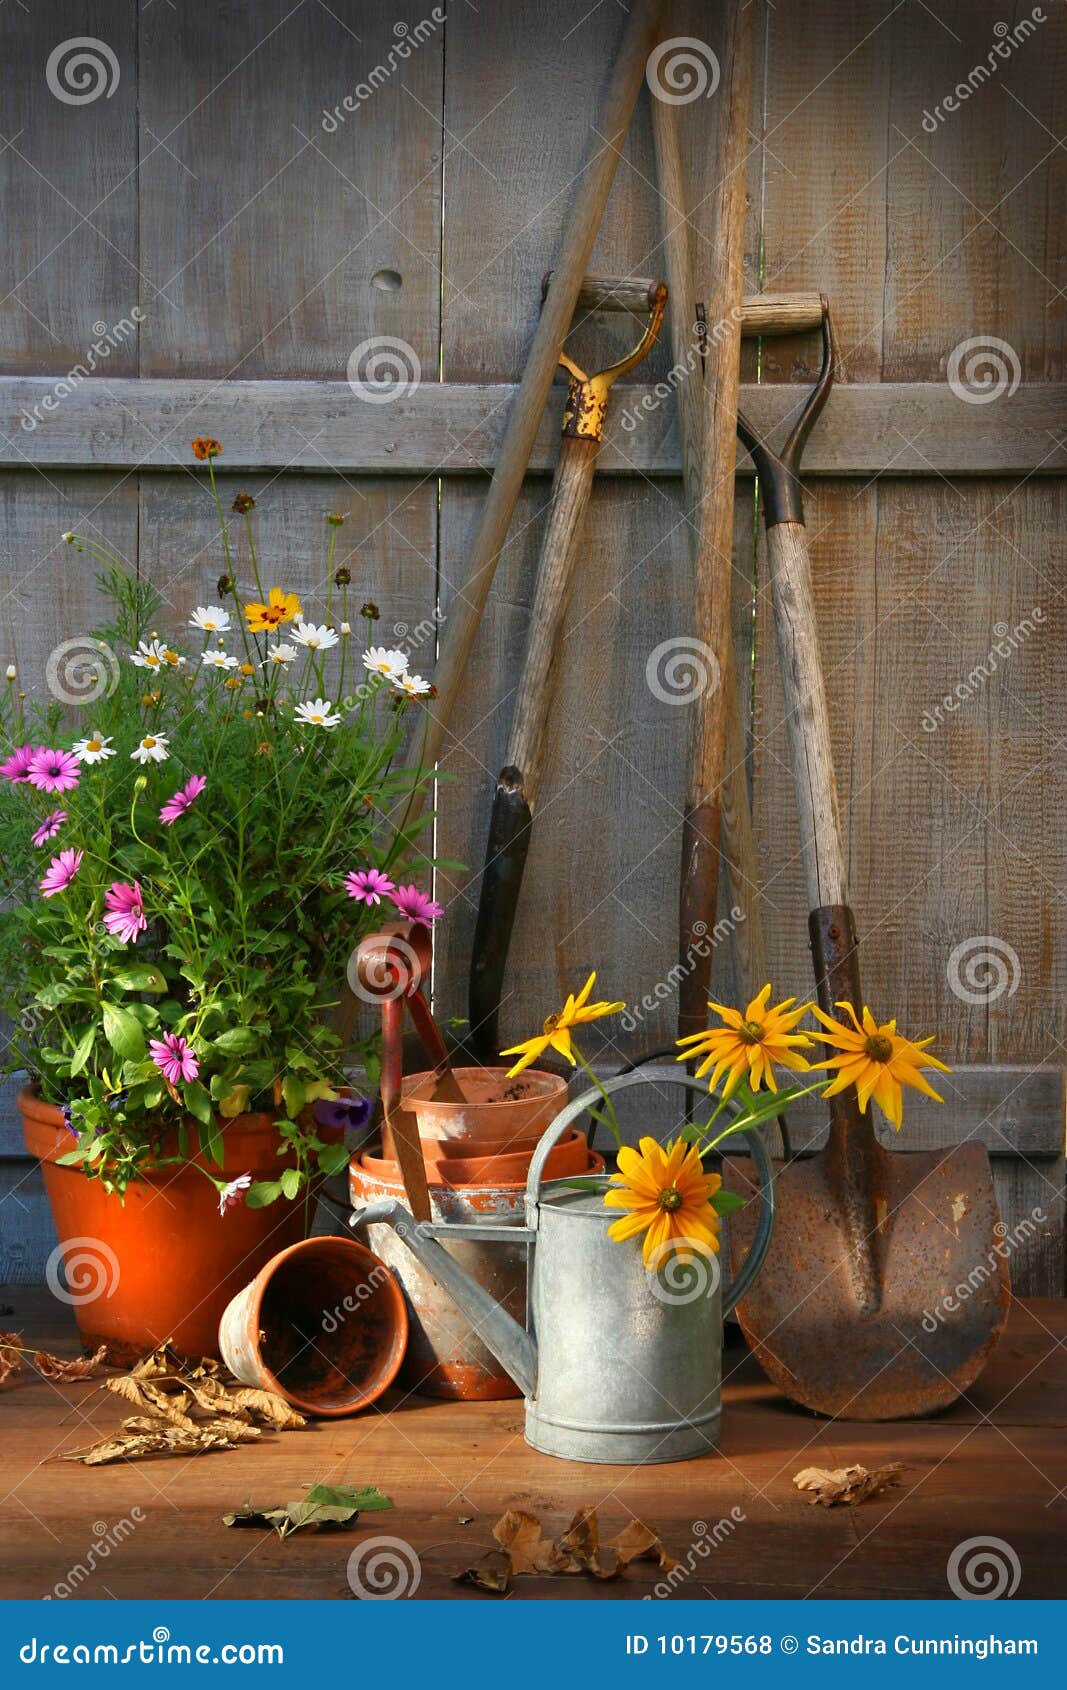 Garden Shed With Tools And Pots Stock Photo - Image of 